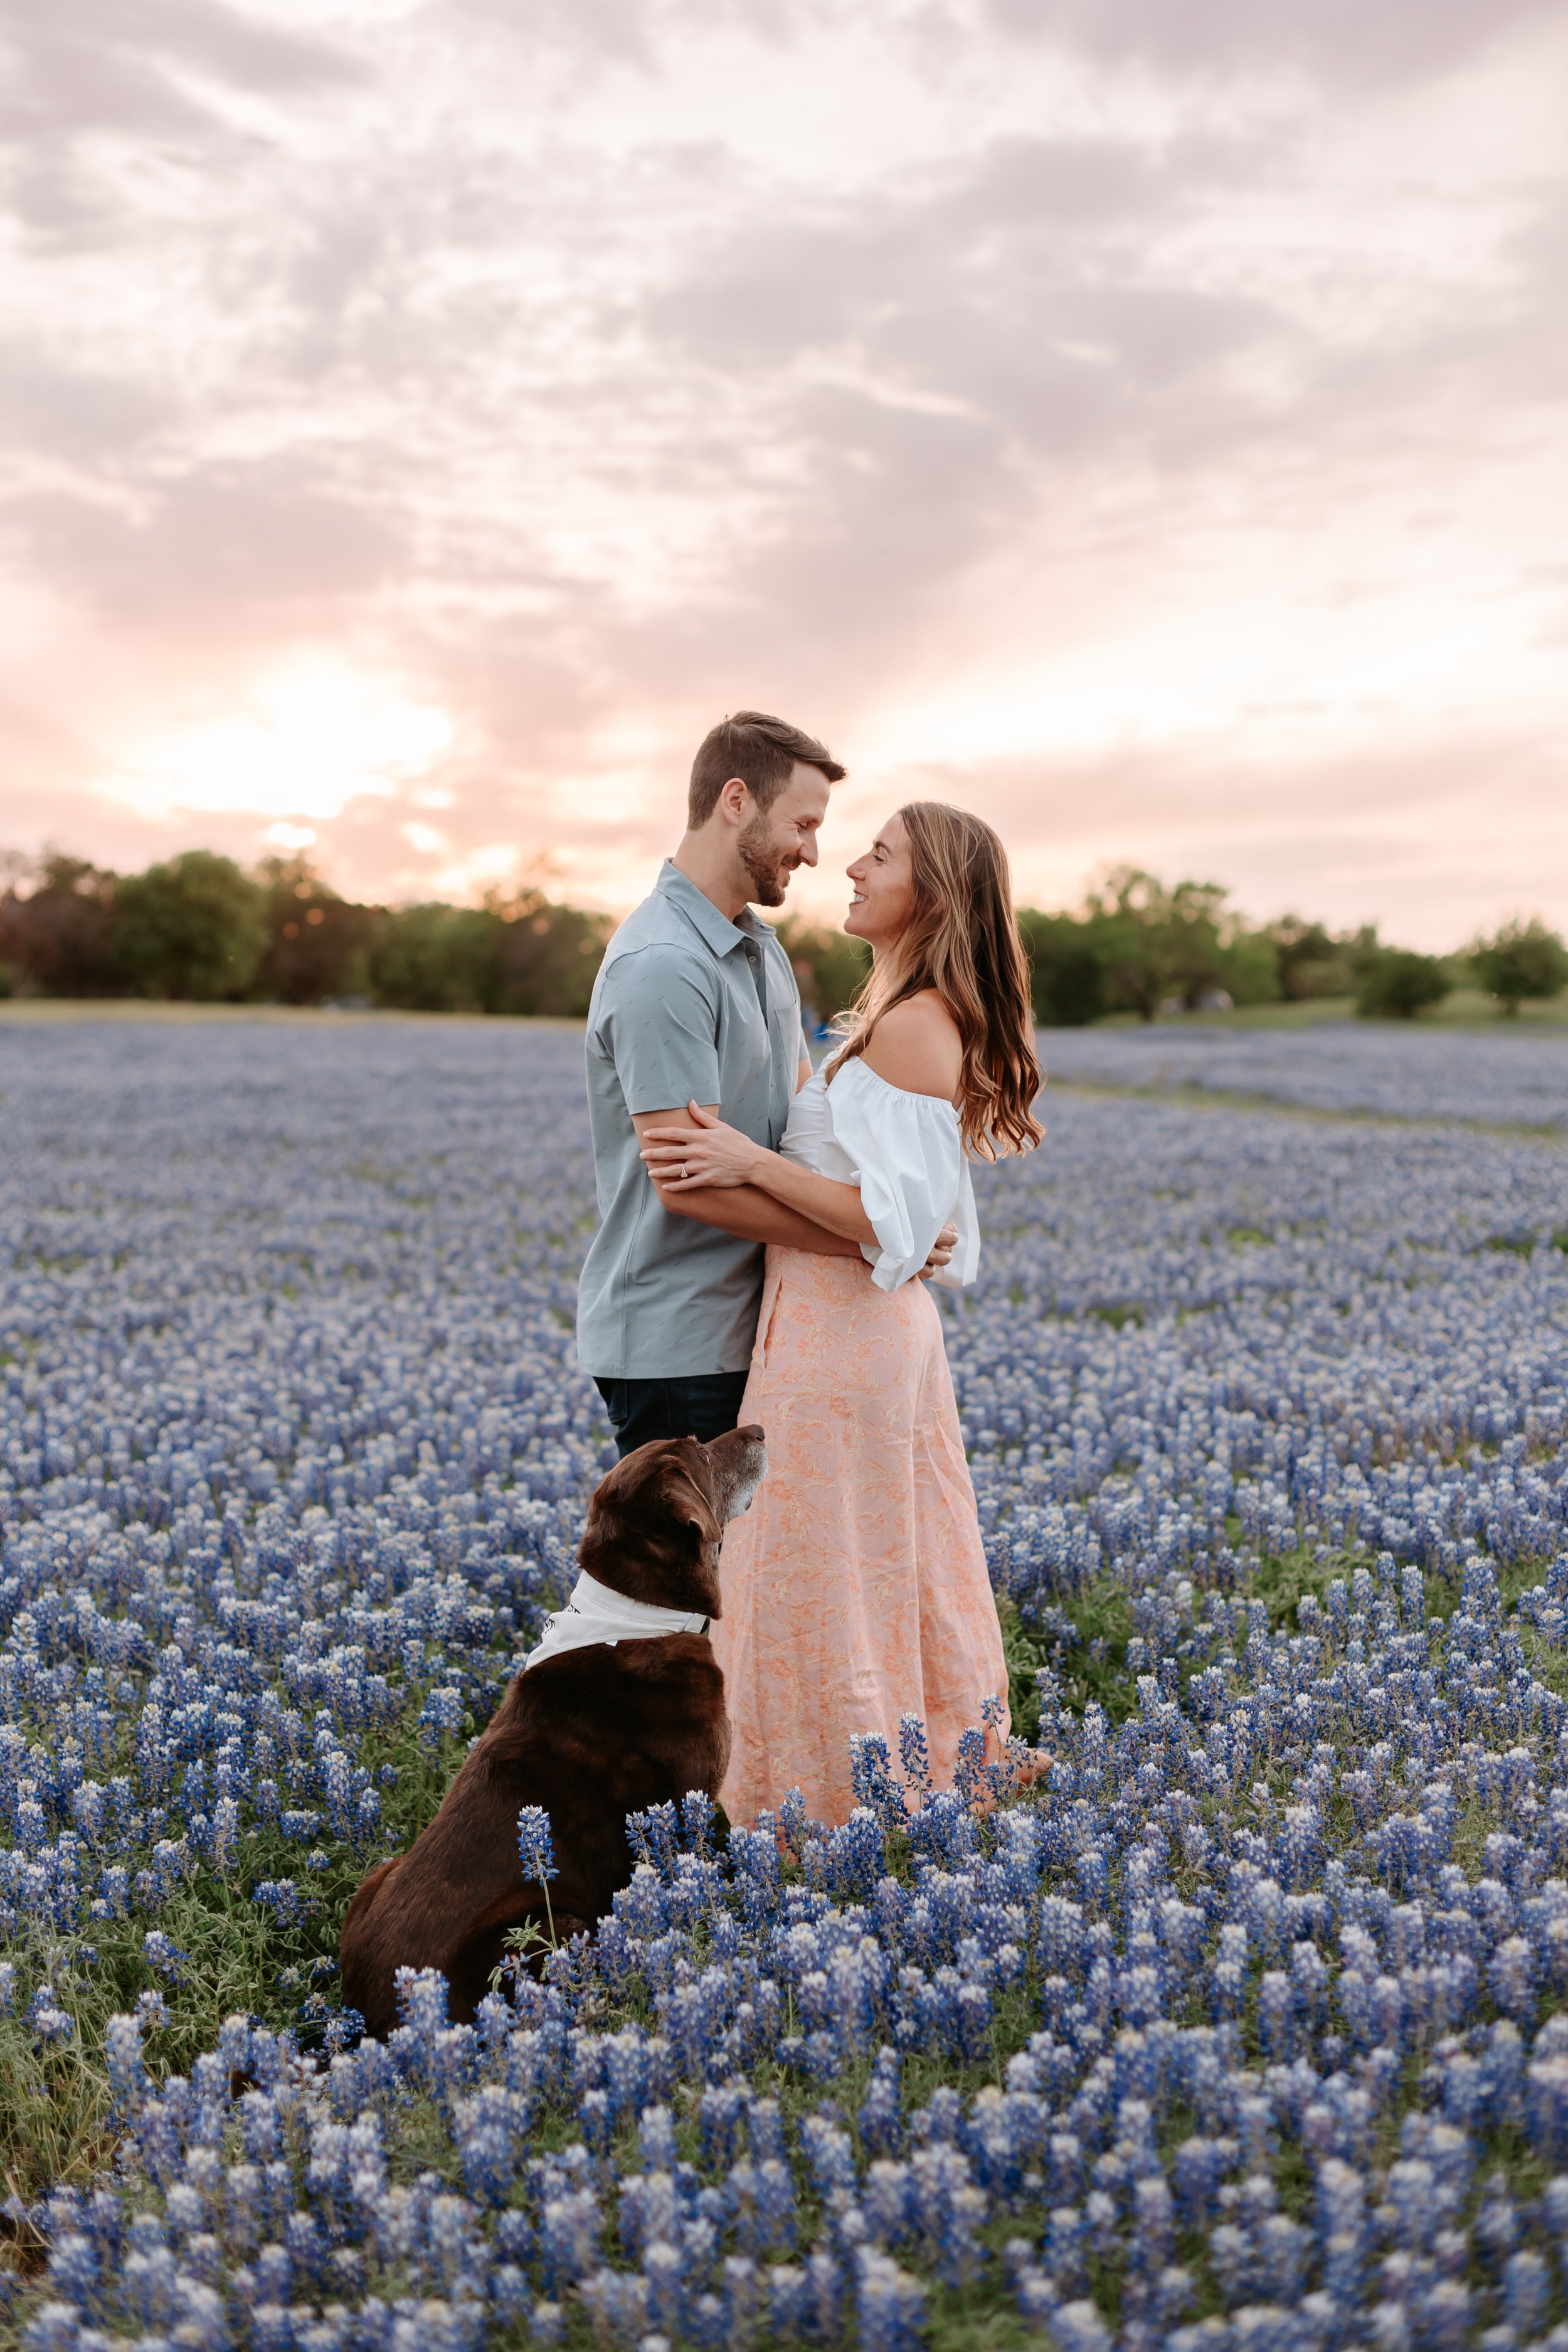 Man and woman embrace in a field of flowers with their dog.